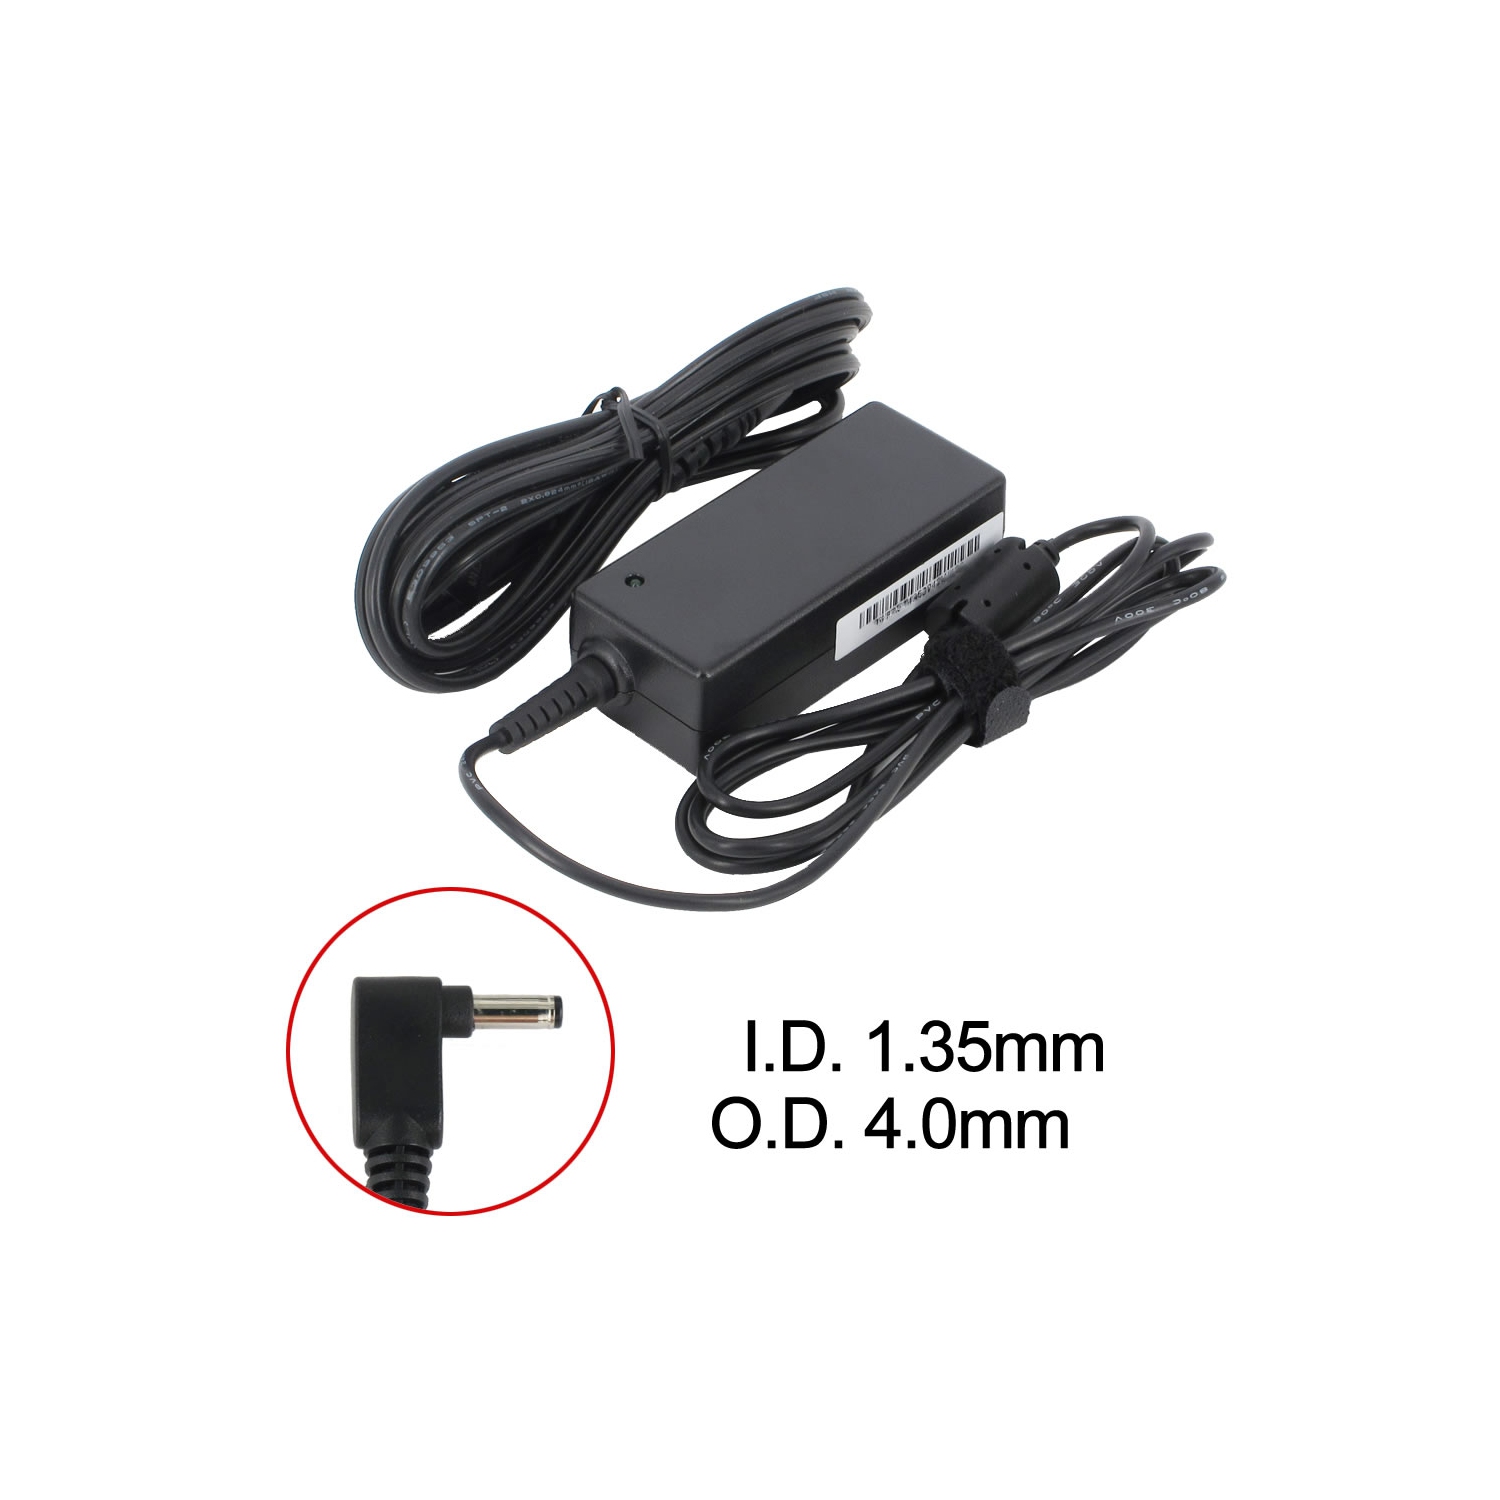 BattDepot: New Laptop AC Adapter for Asus Chromebook C300, 0A001-00230300, 0A001-00233100, EXA1206CH, W15-065N1A